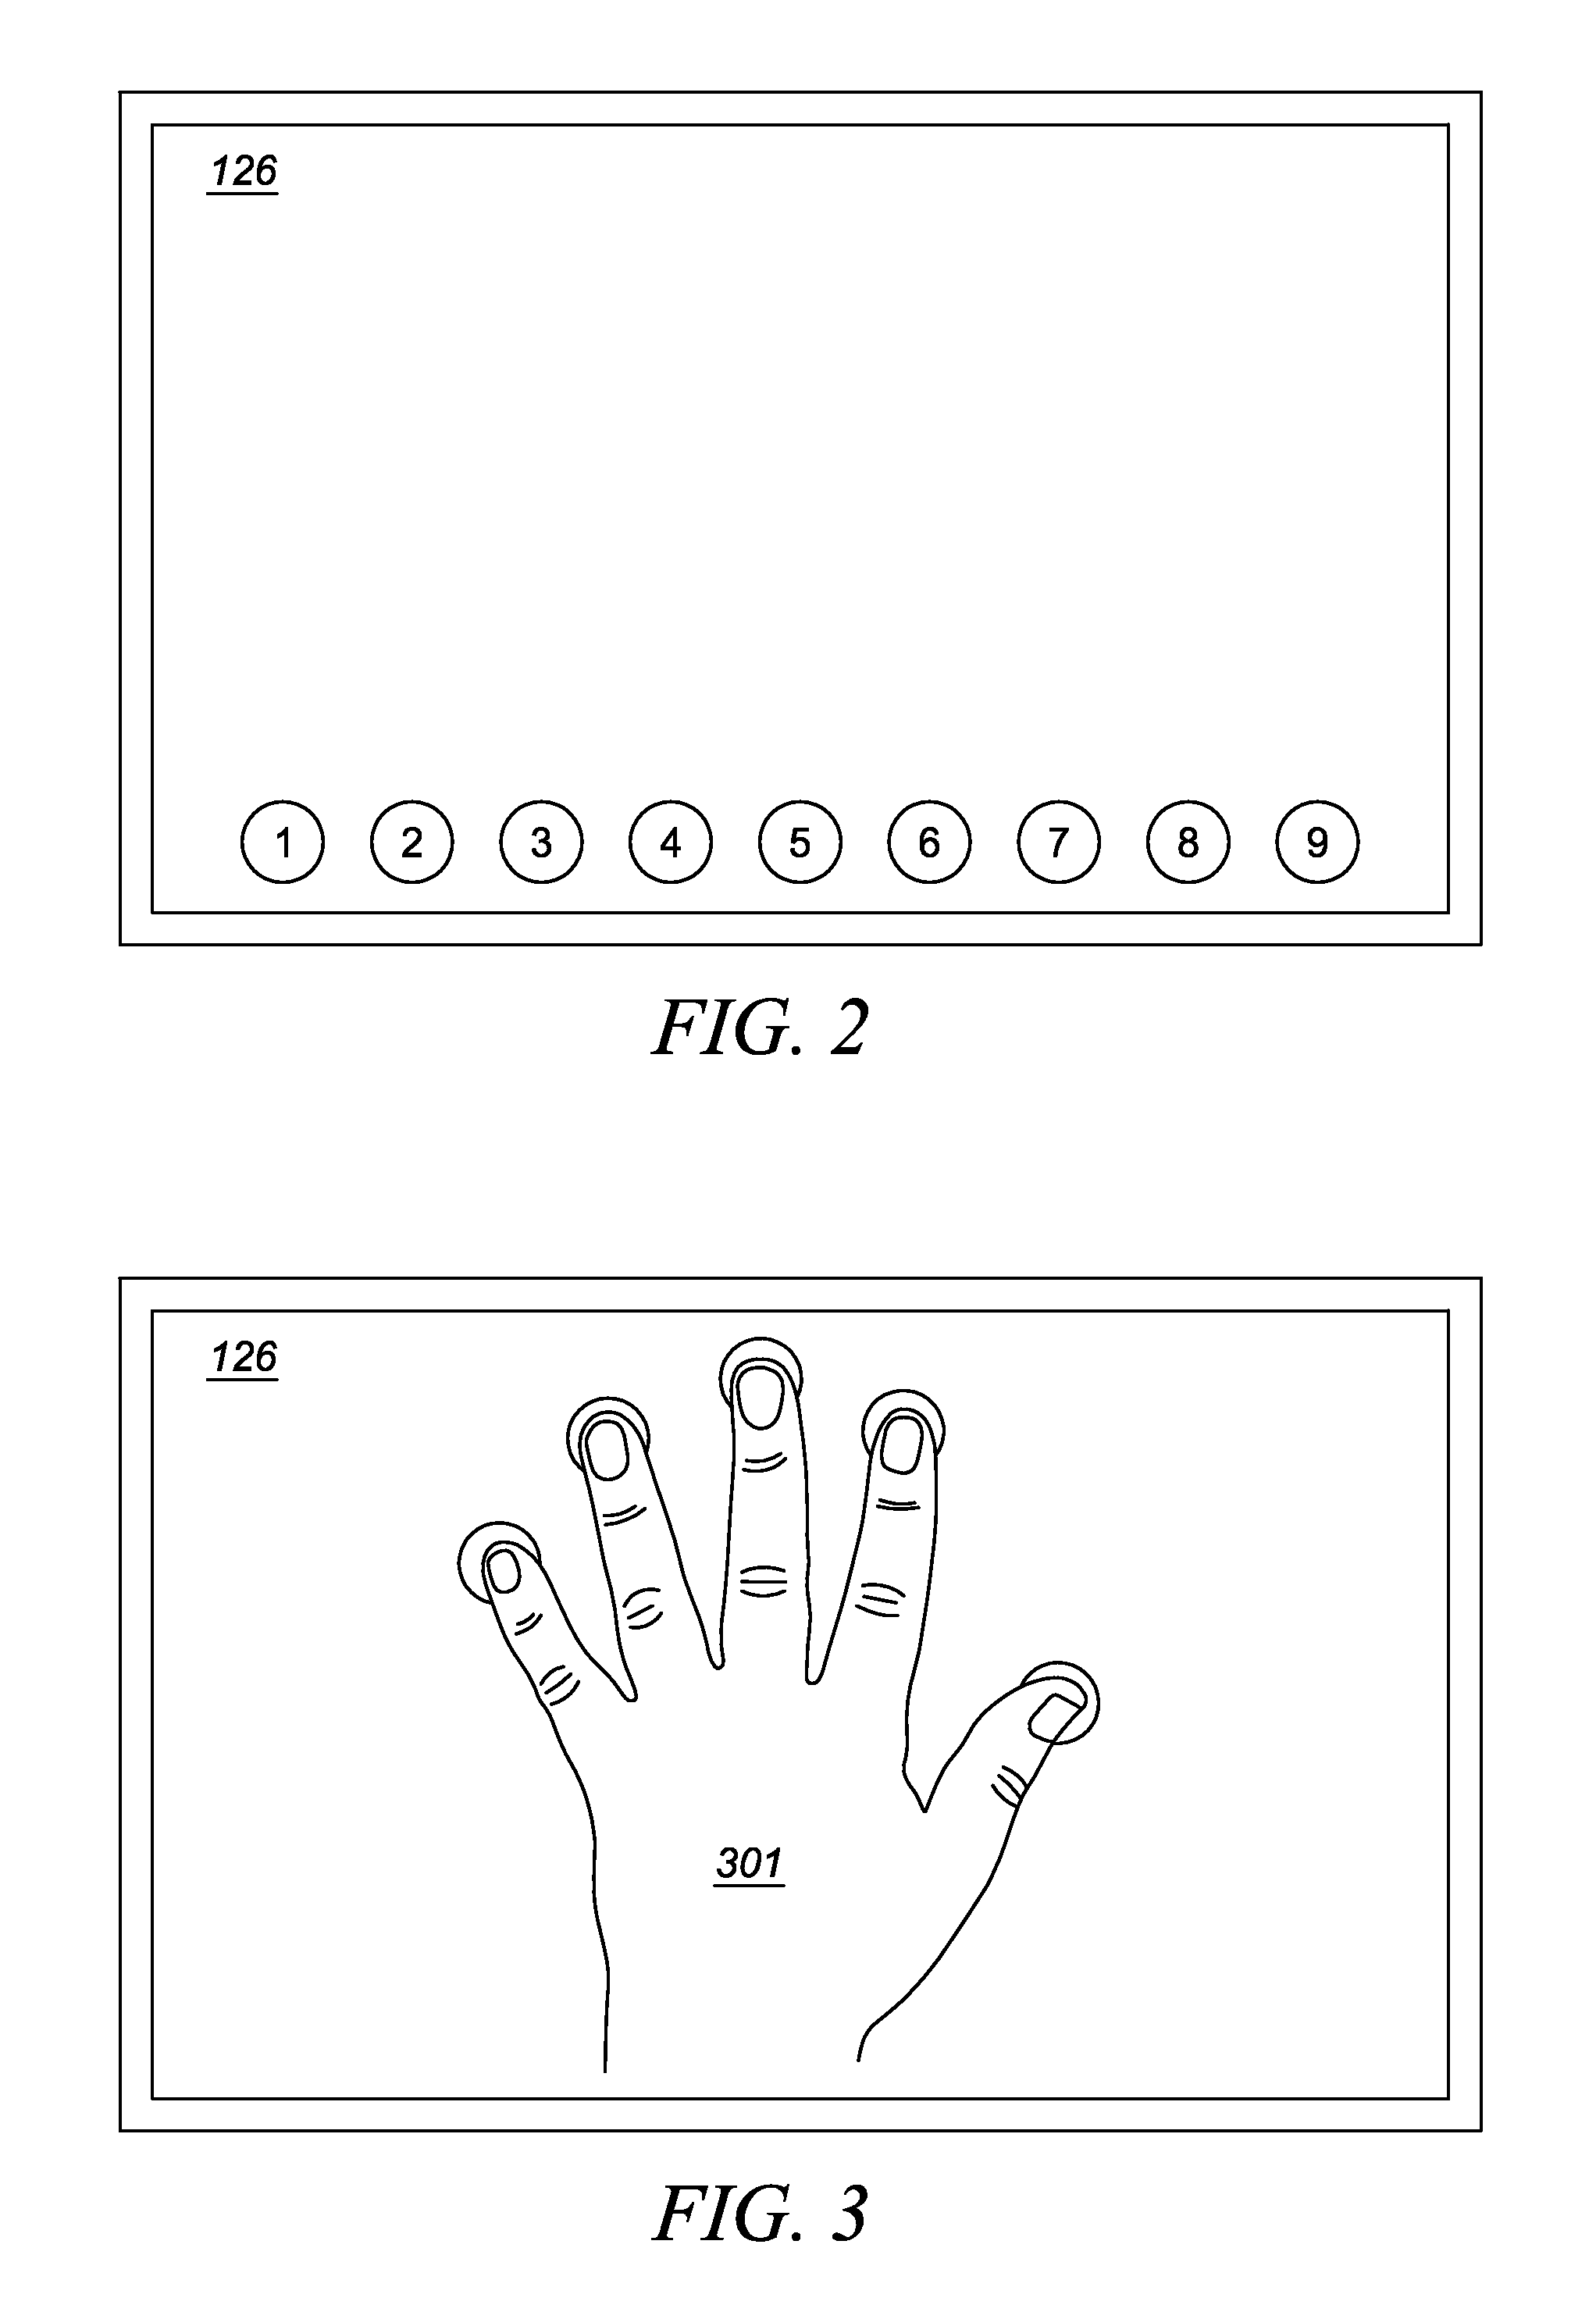 Method and apparatus for managing user interface elements on a touch-screen device